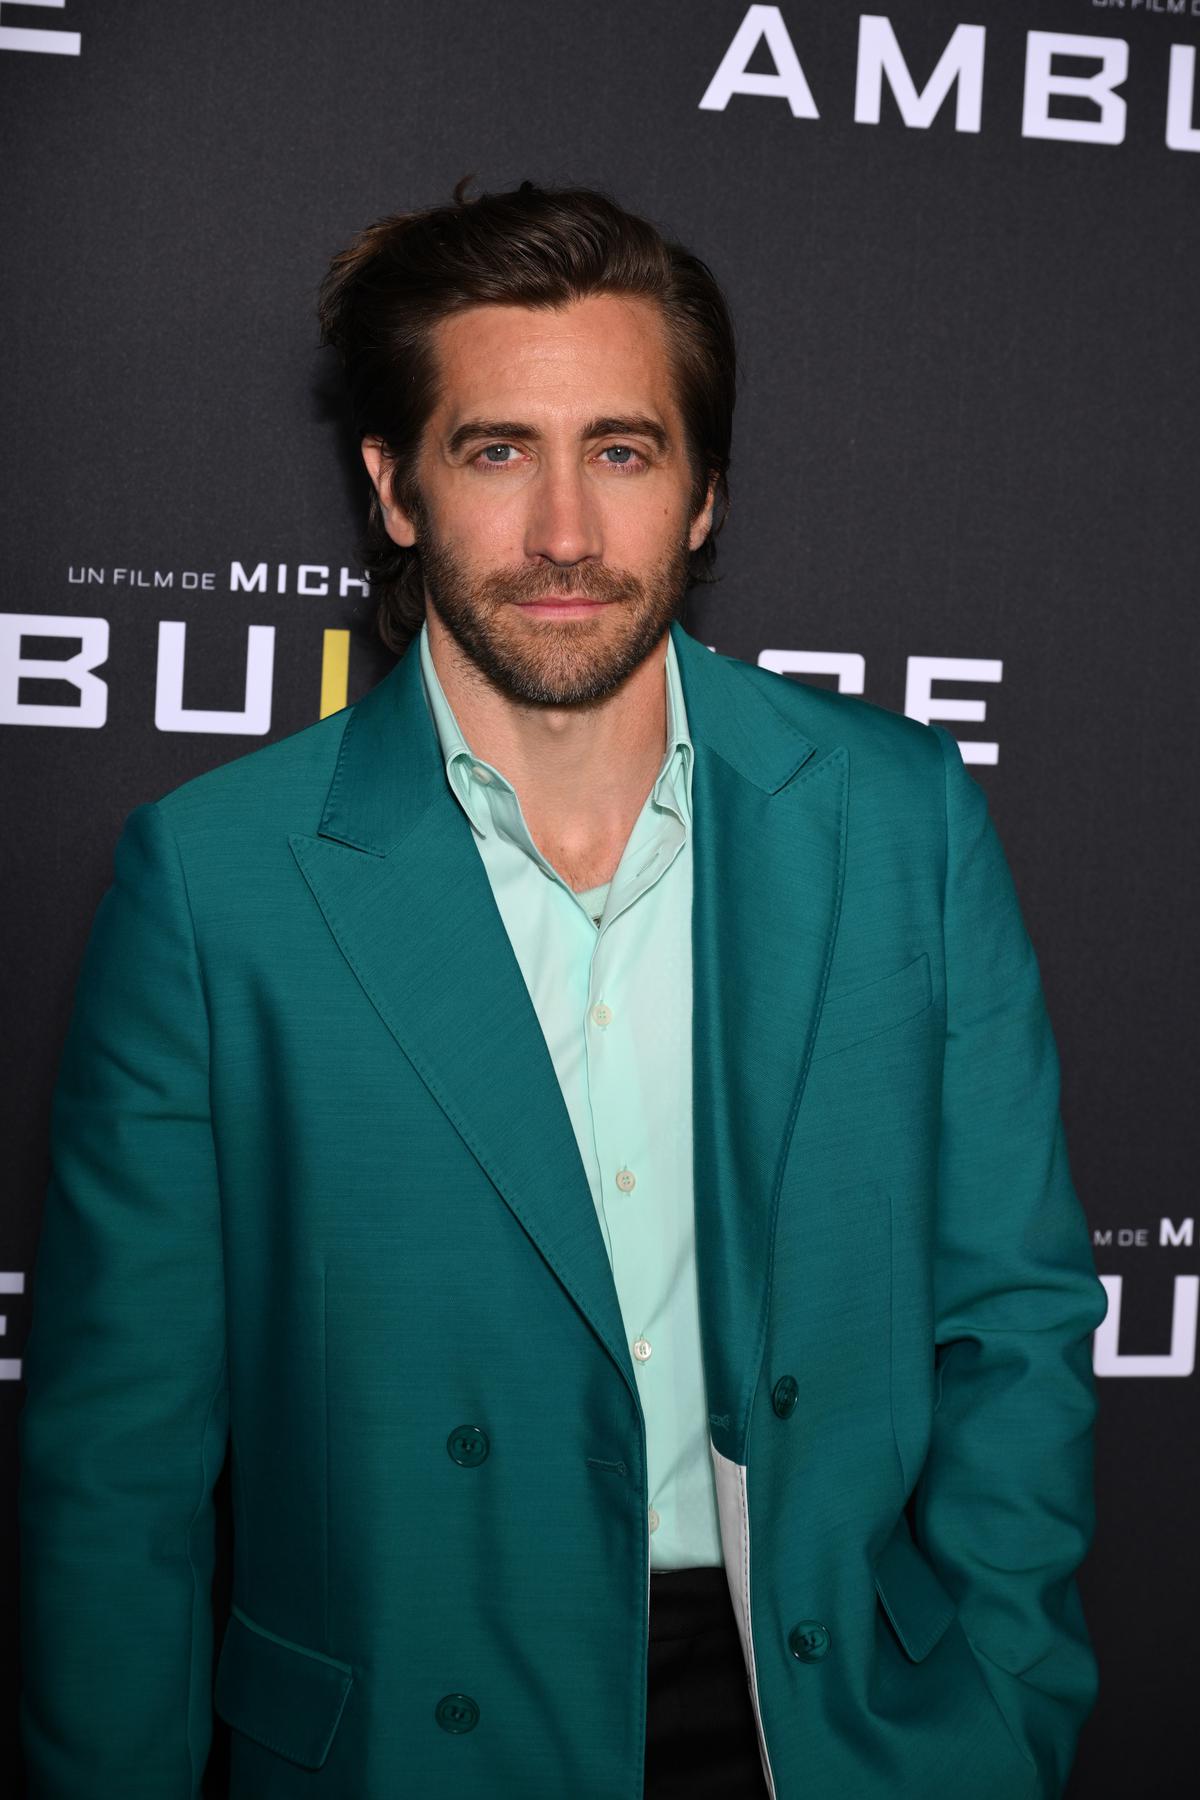 Jake Gyllenhaal plays the role of a criminal named Danny Sharp in the film 